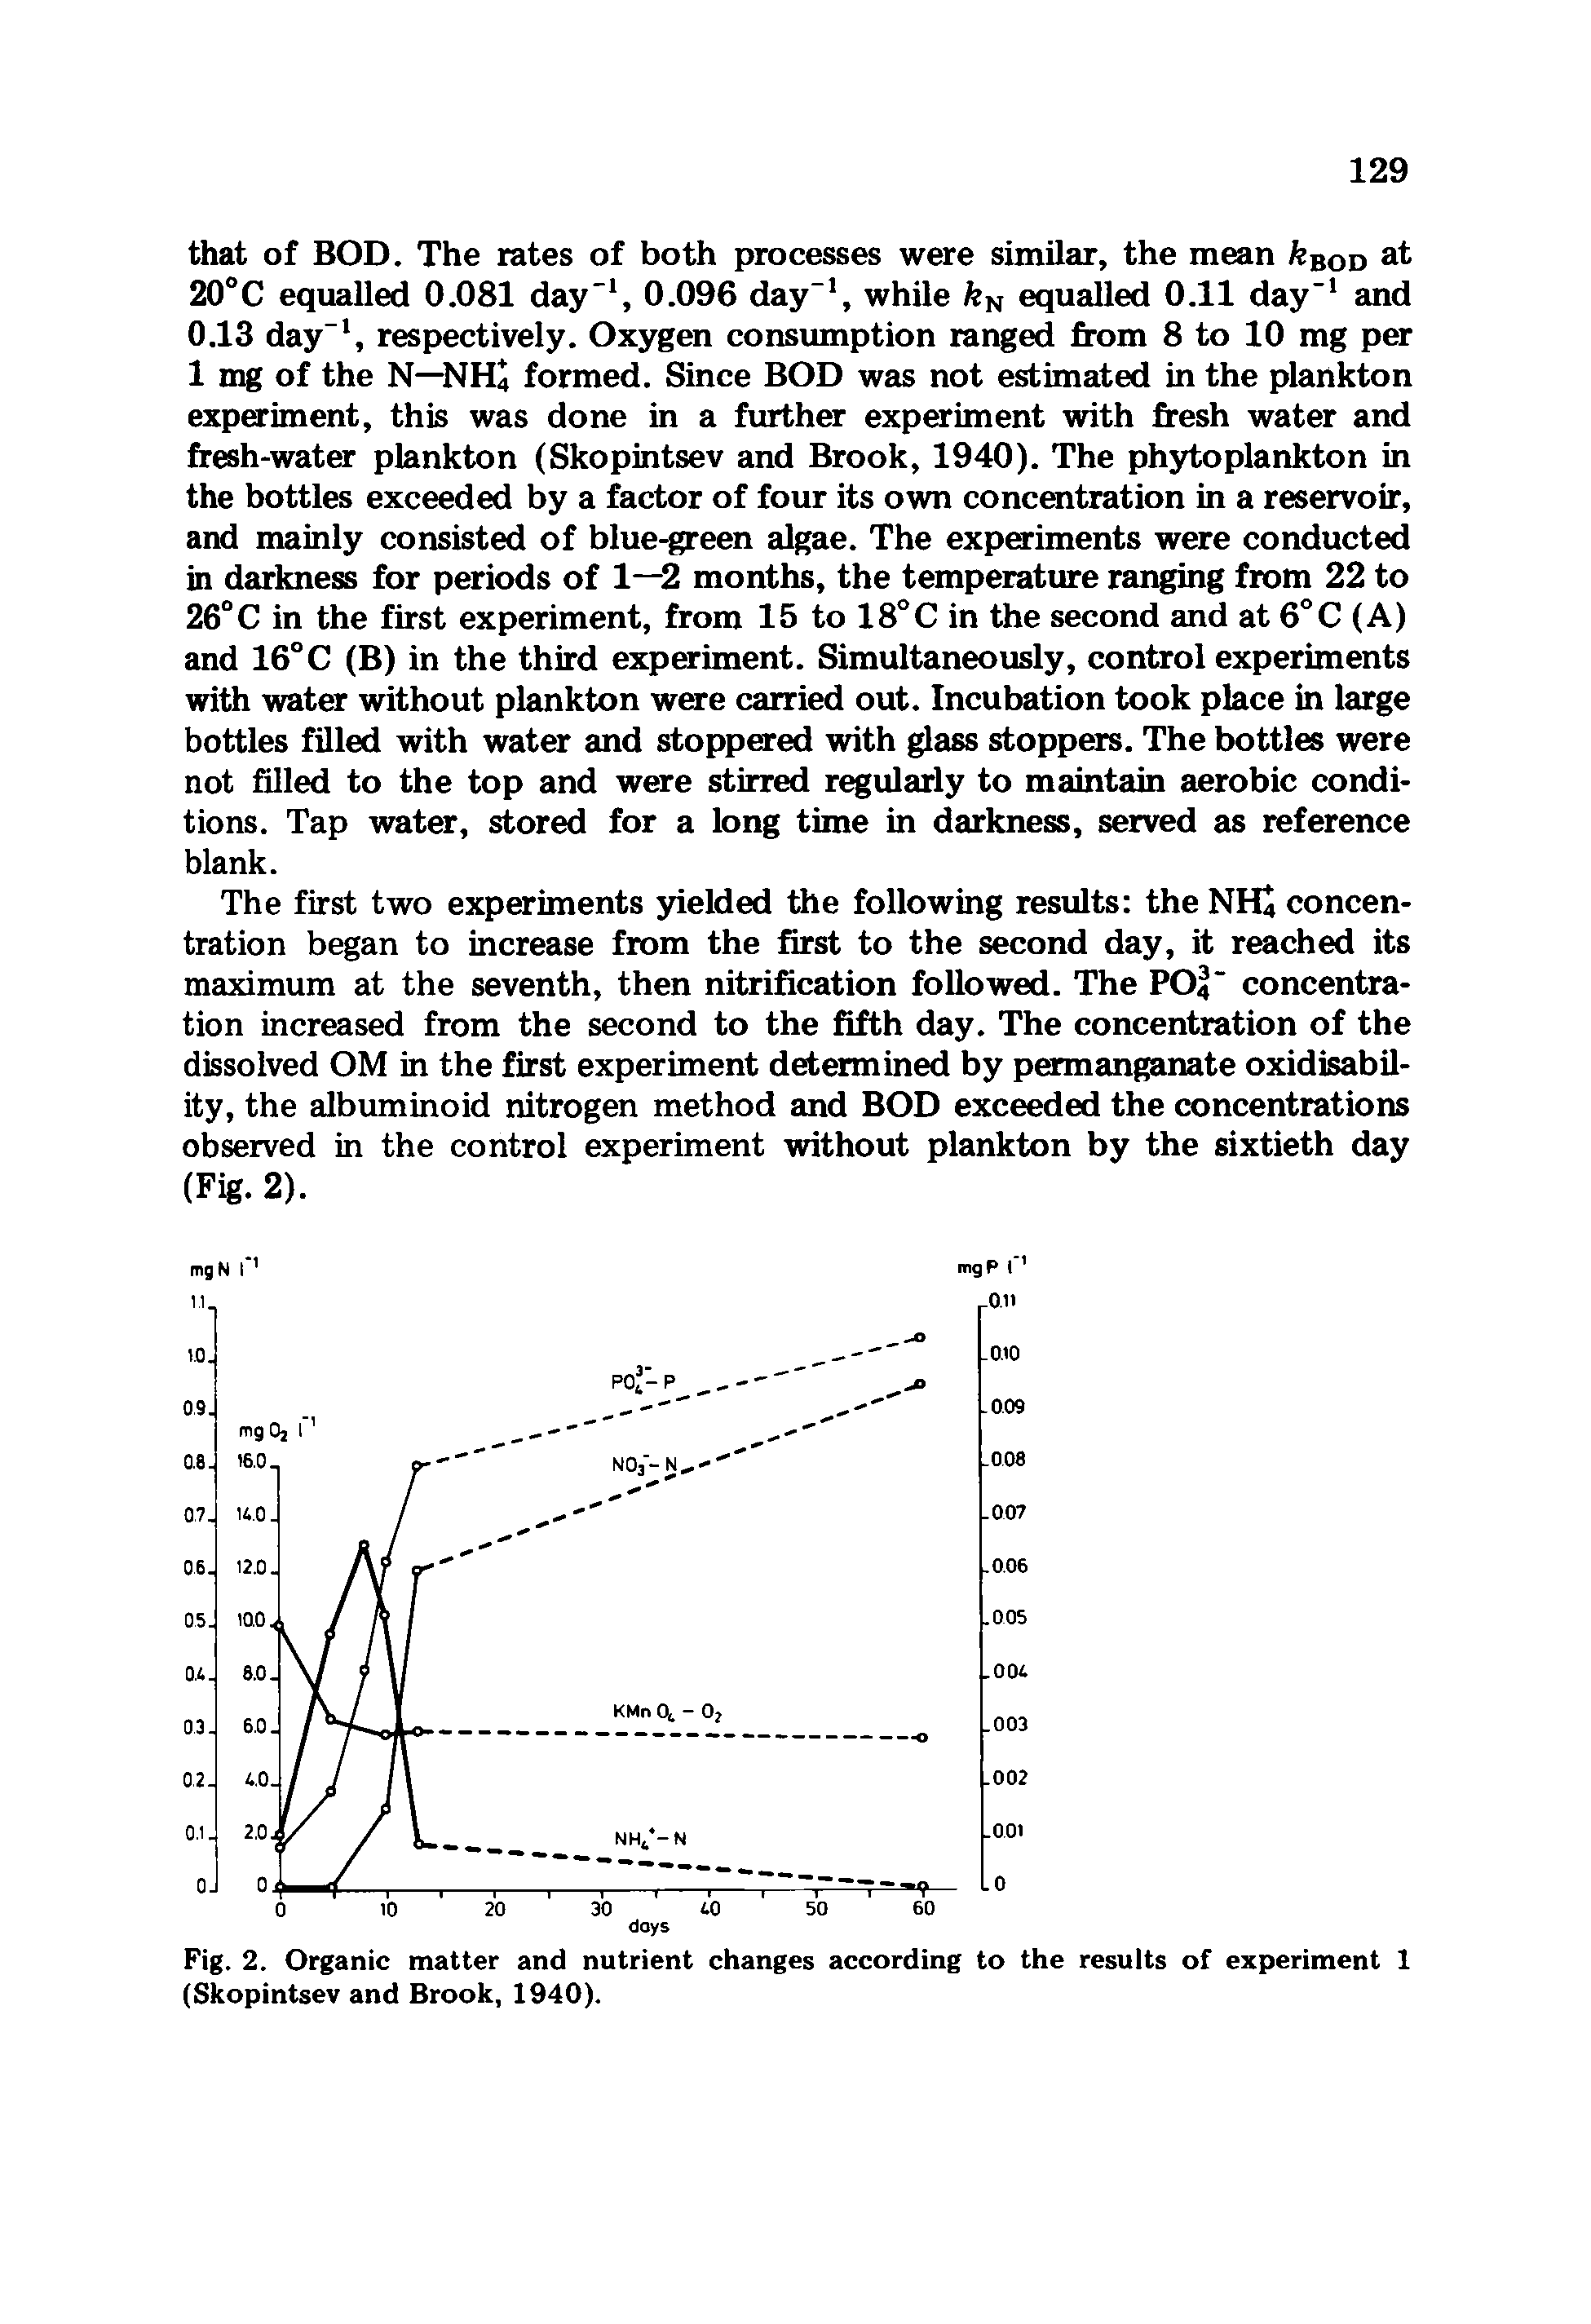 Fig. 2. Organic matter and nutrient changes according to the results of experiment 1 (Skopintsev and Brook, 1940).